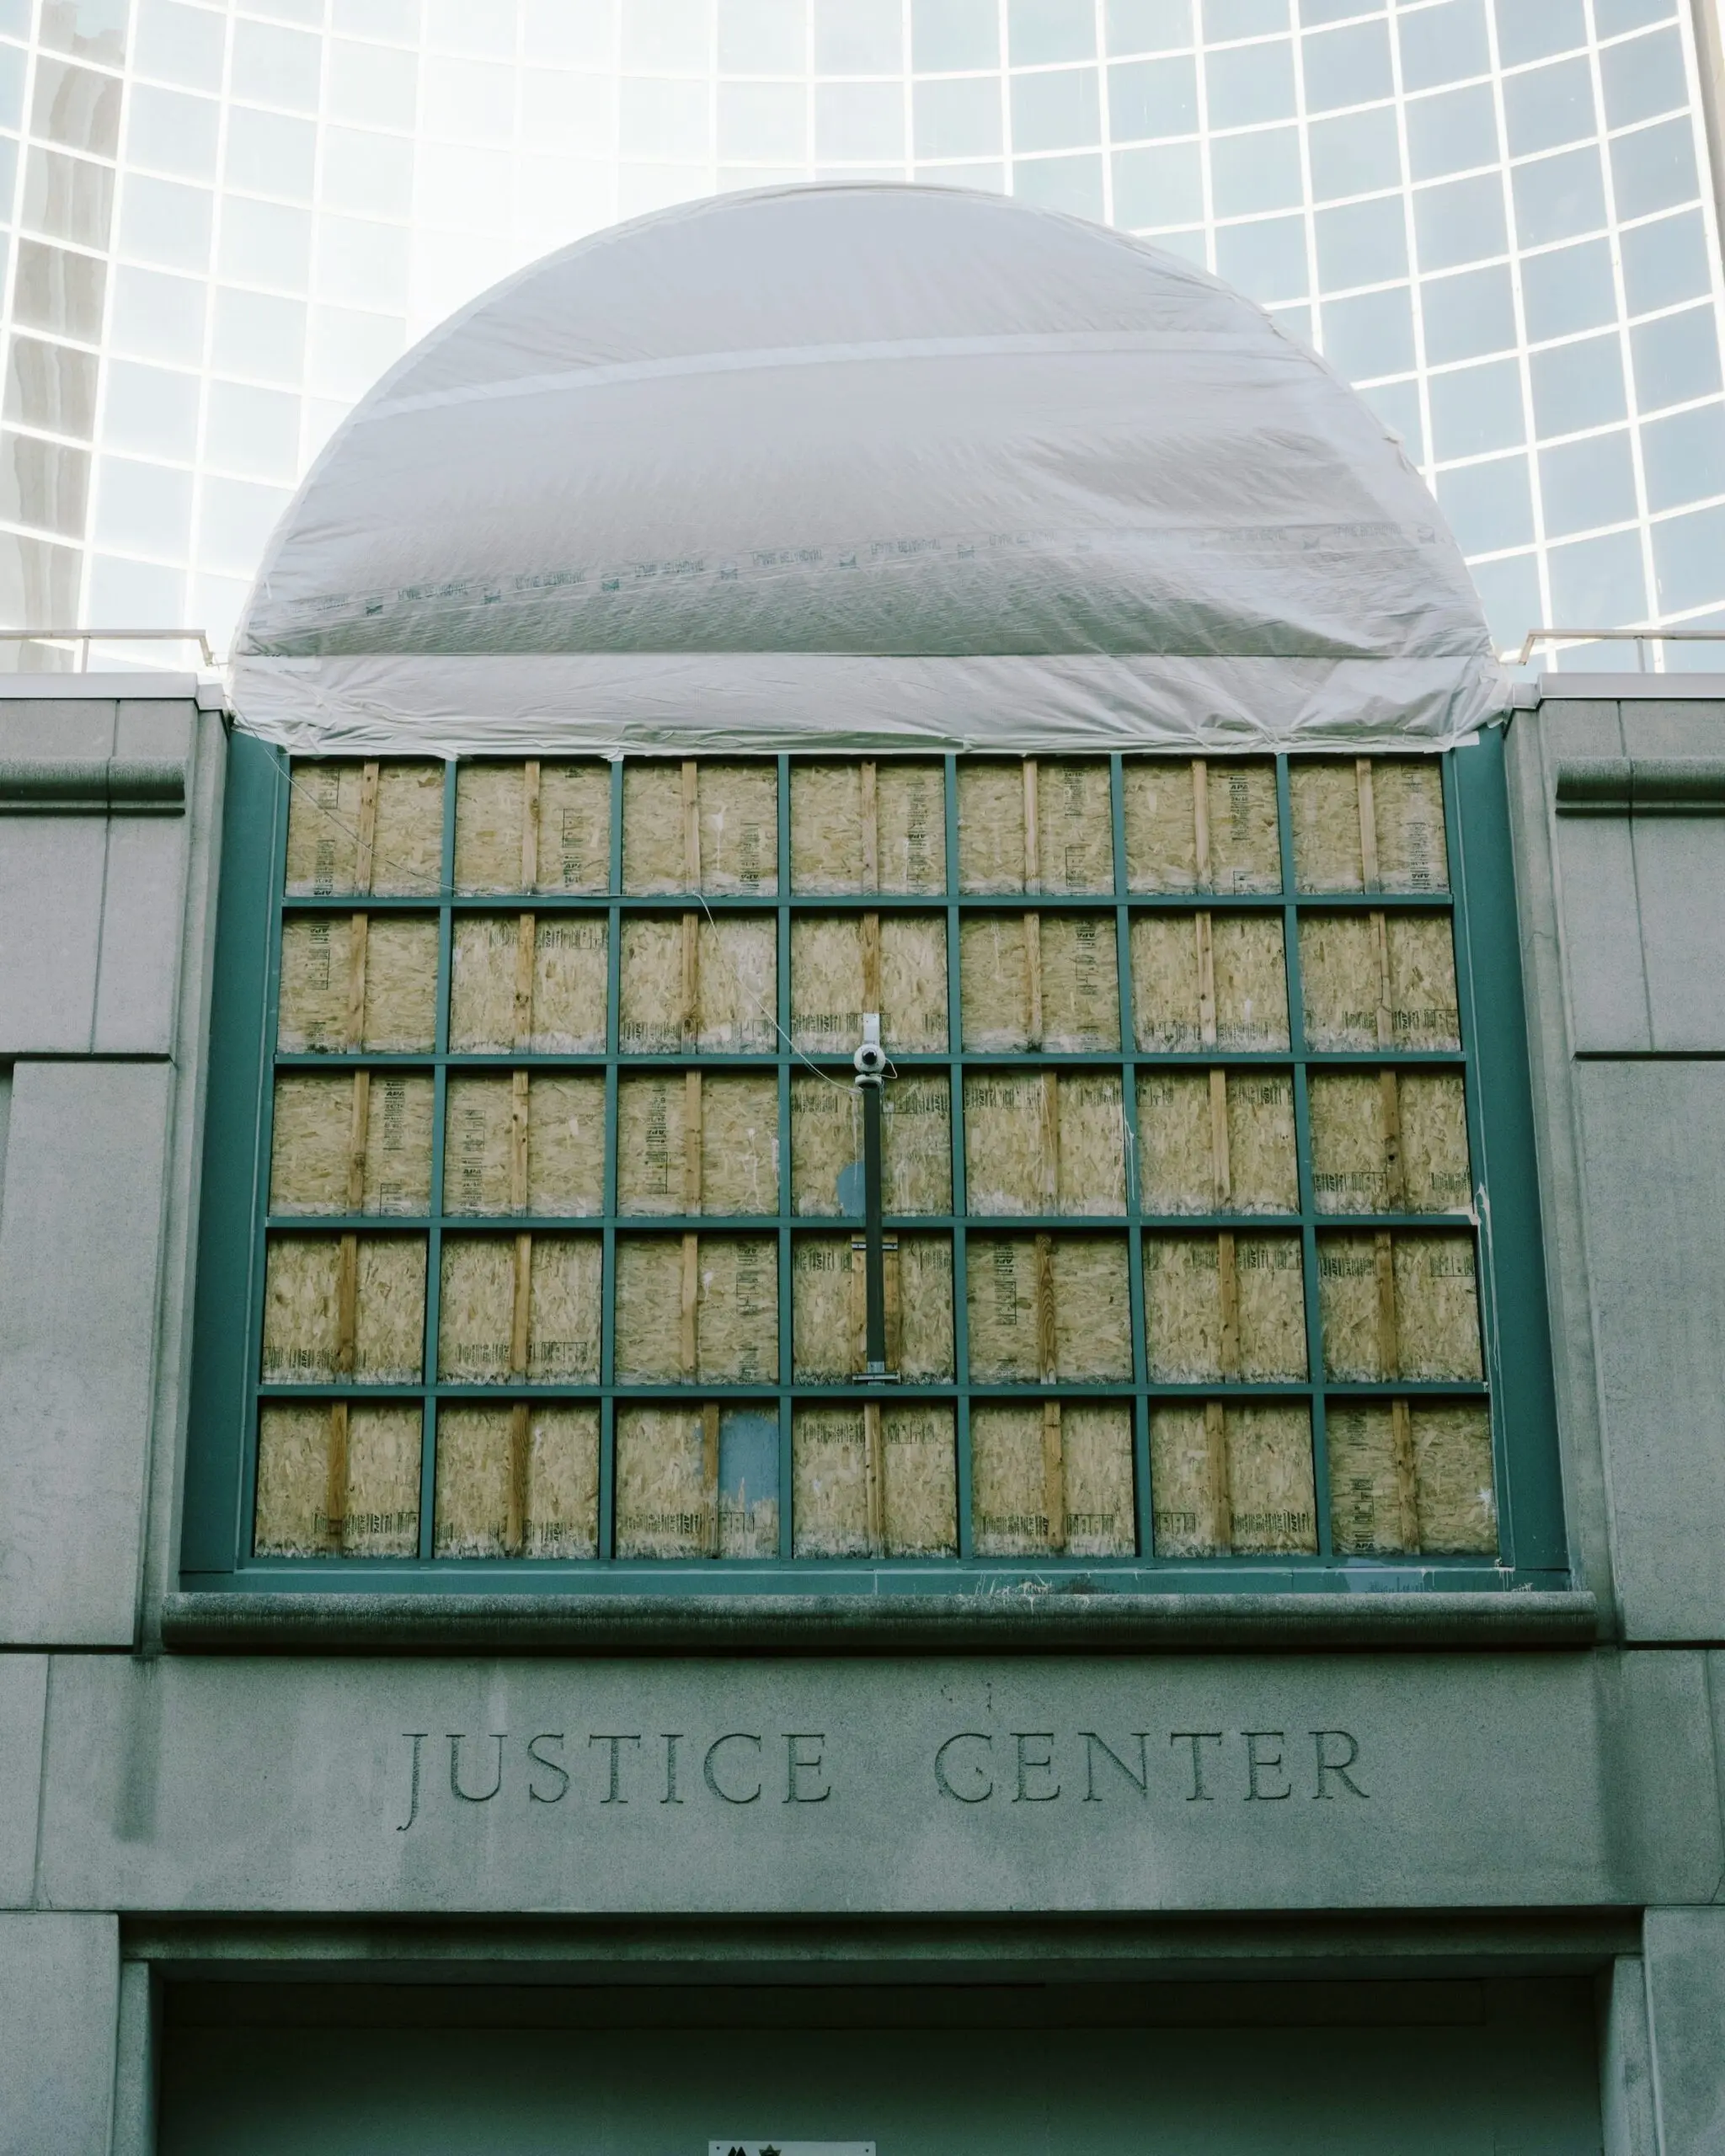 The Multnomah County Justice Center covered in tarps and boarded up with plywood.